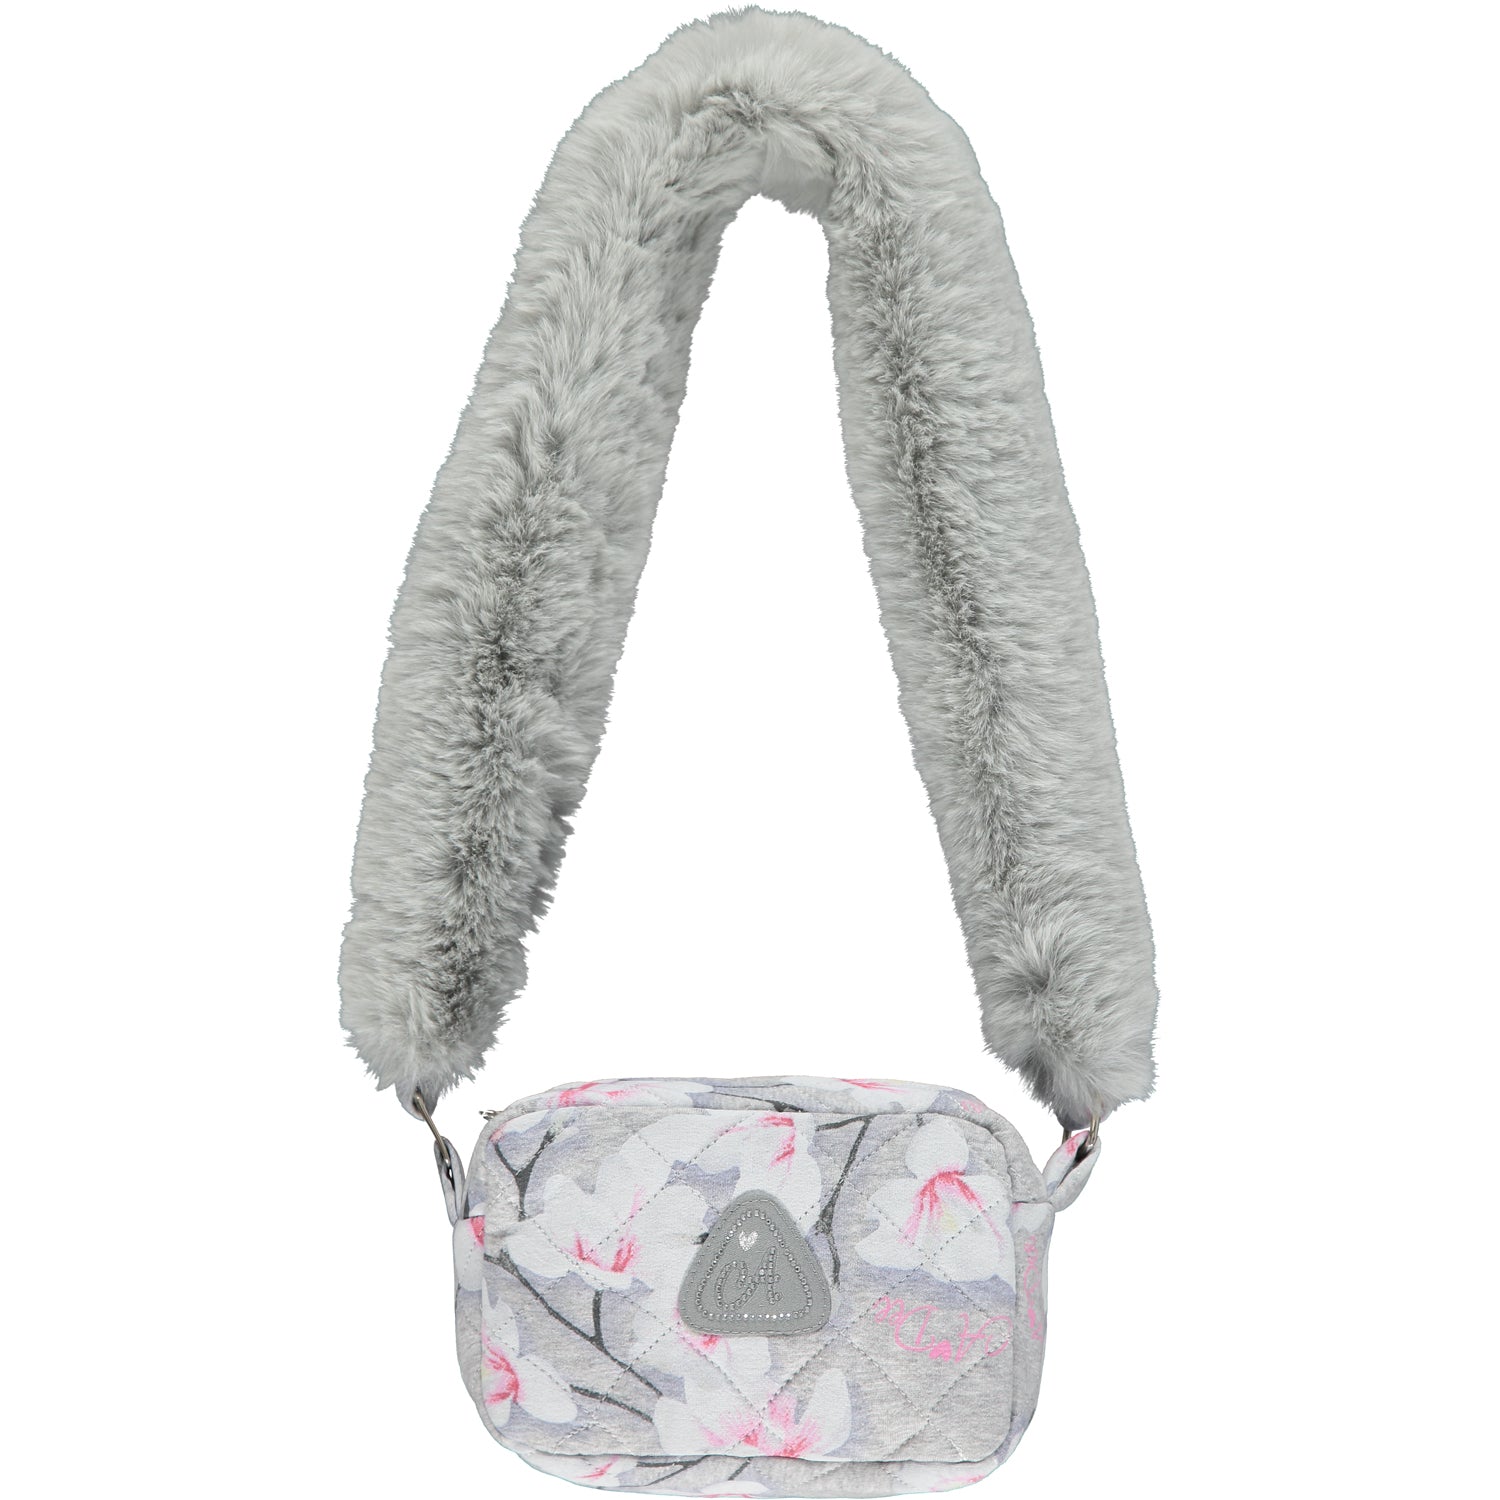 AW21 A DEE Girls Perie Magnolia Padded Bag